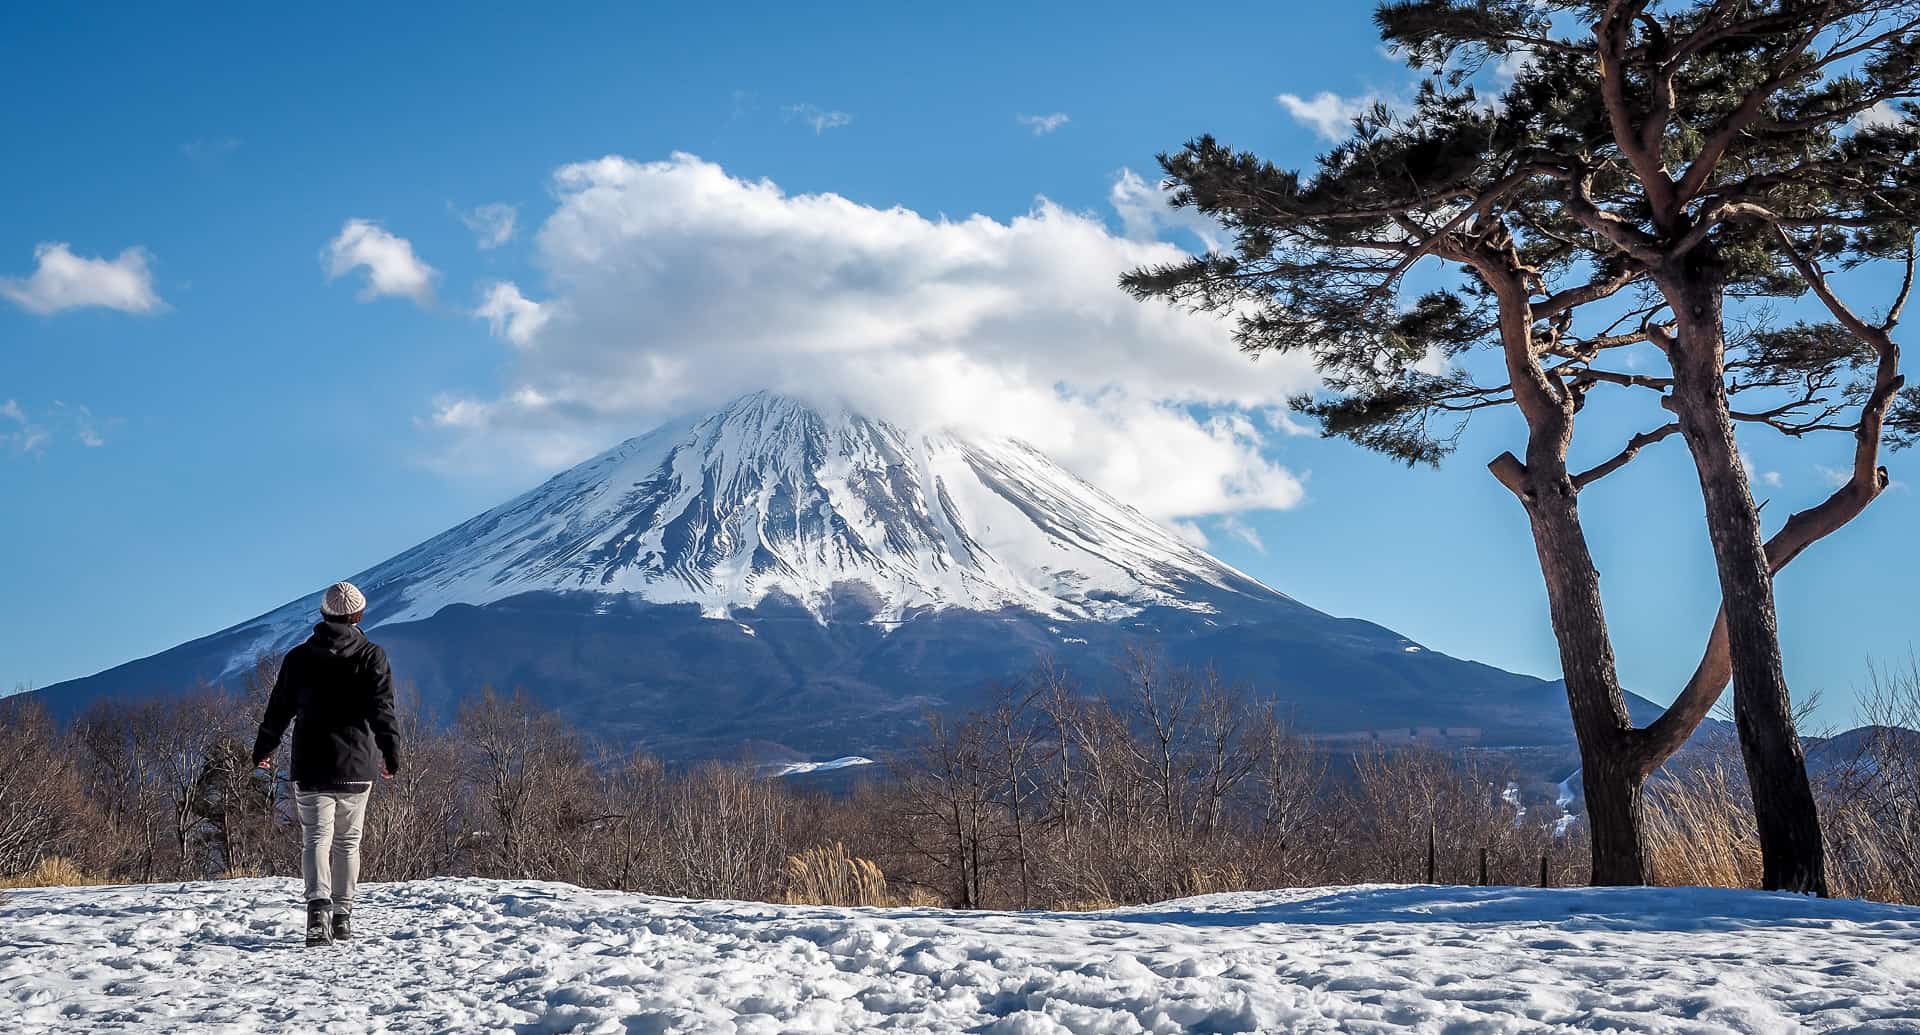 mt-fuji-tour-from-tokyo-japan-travel-guide-itinerary-ideas